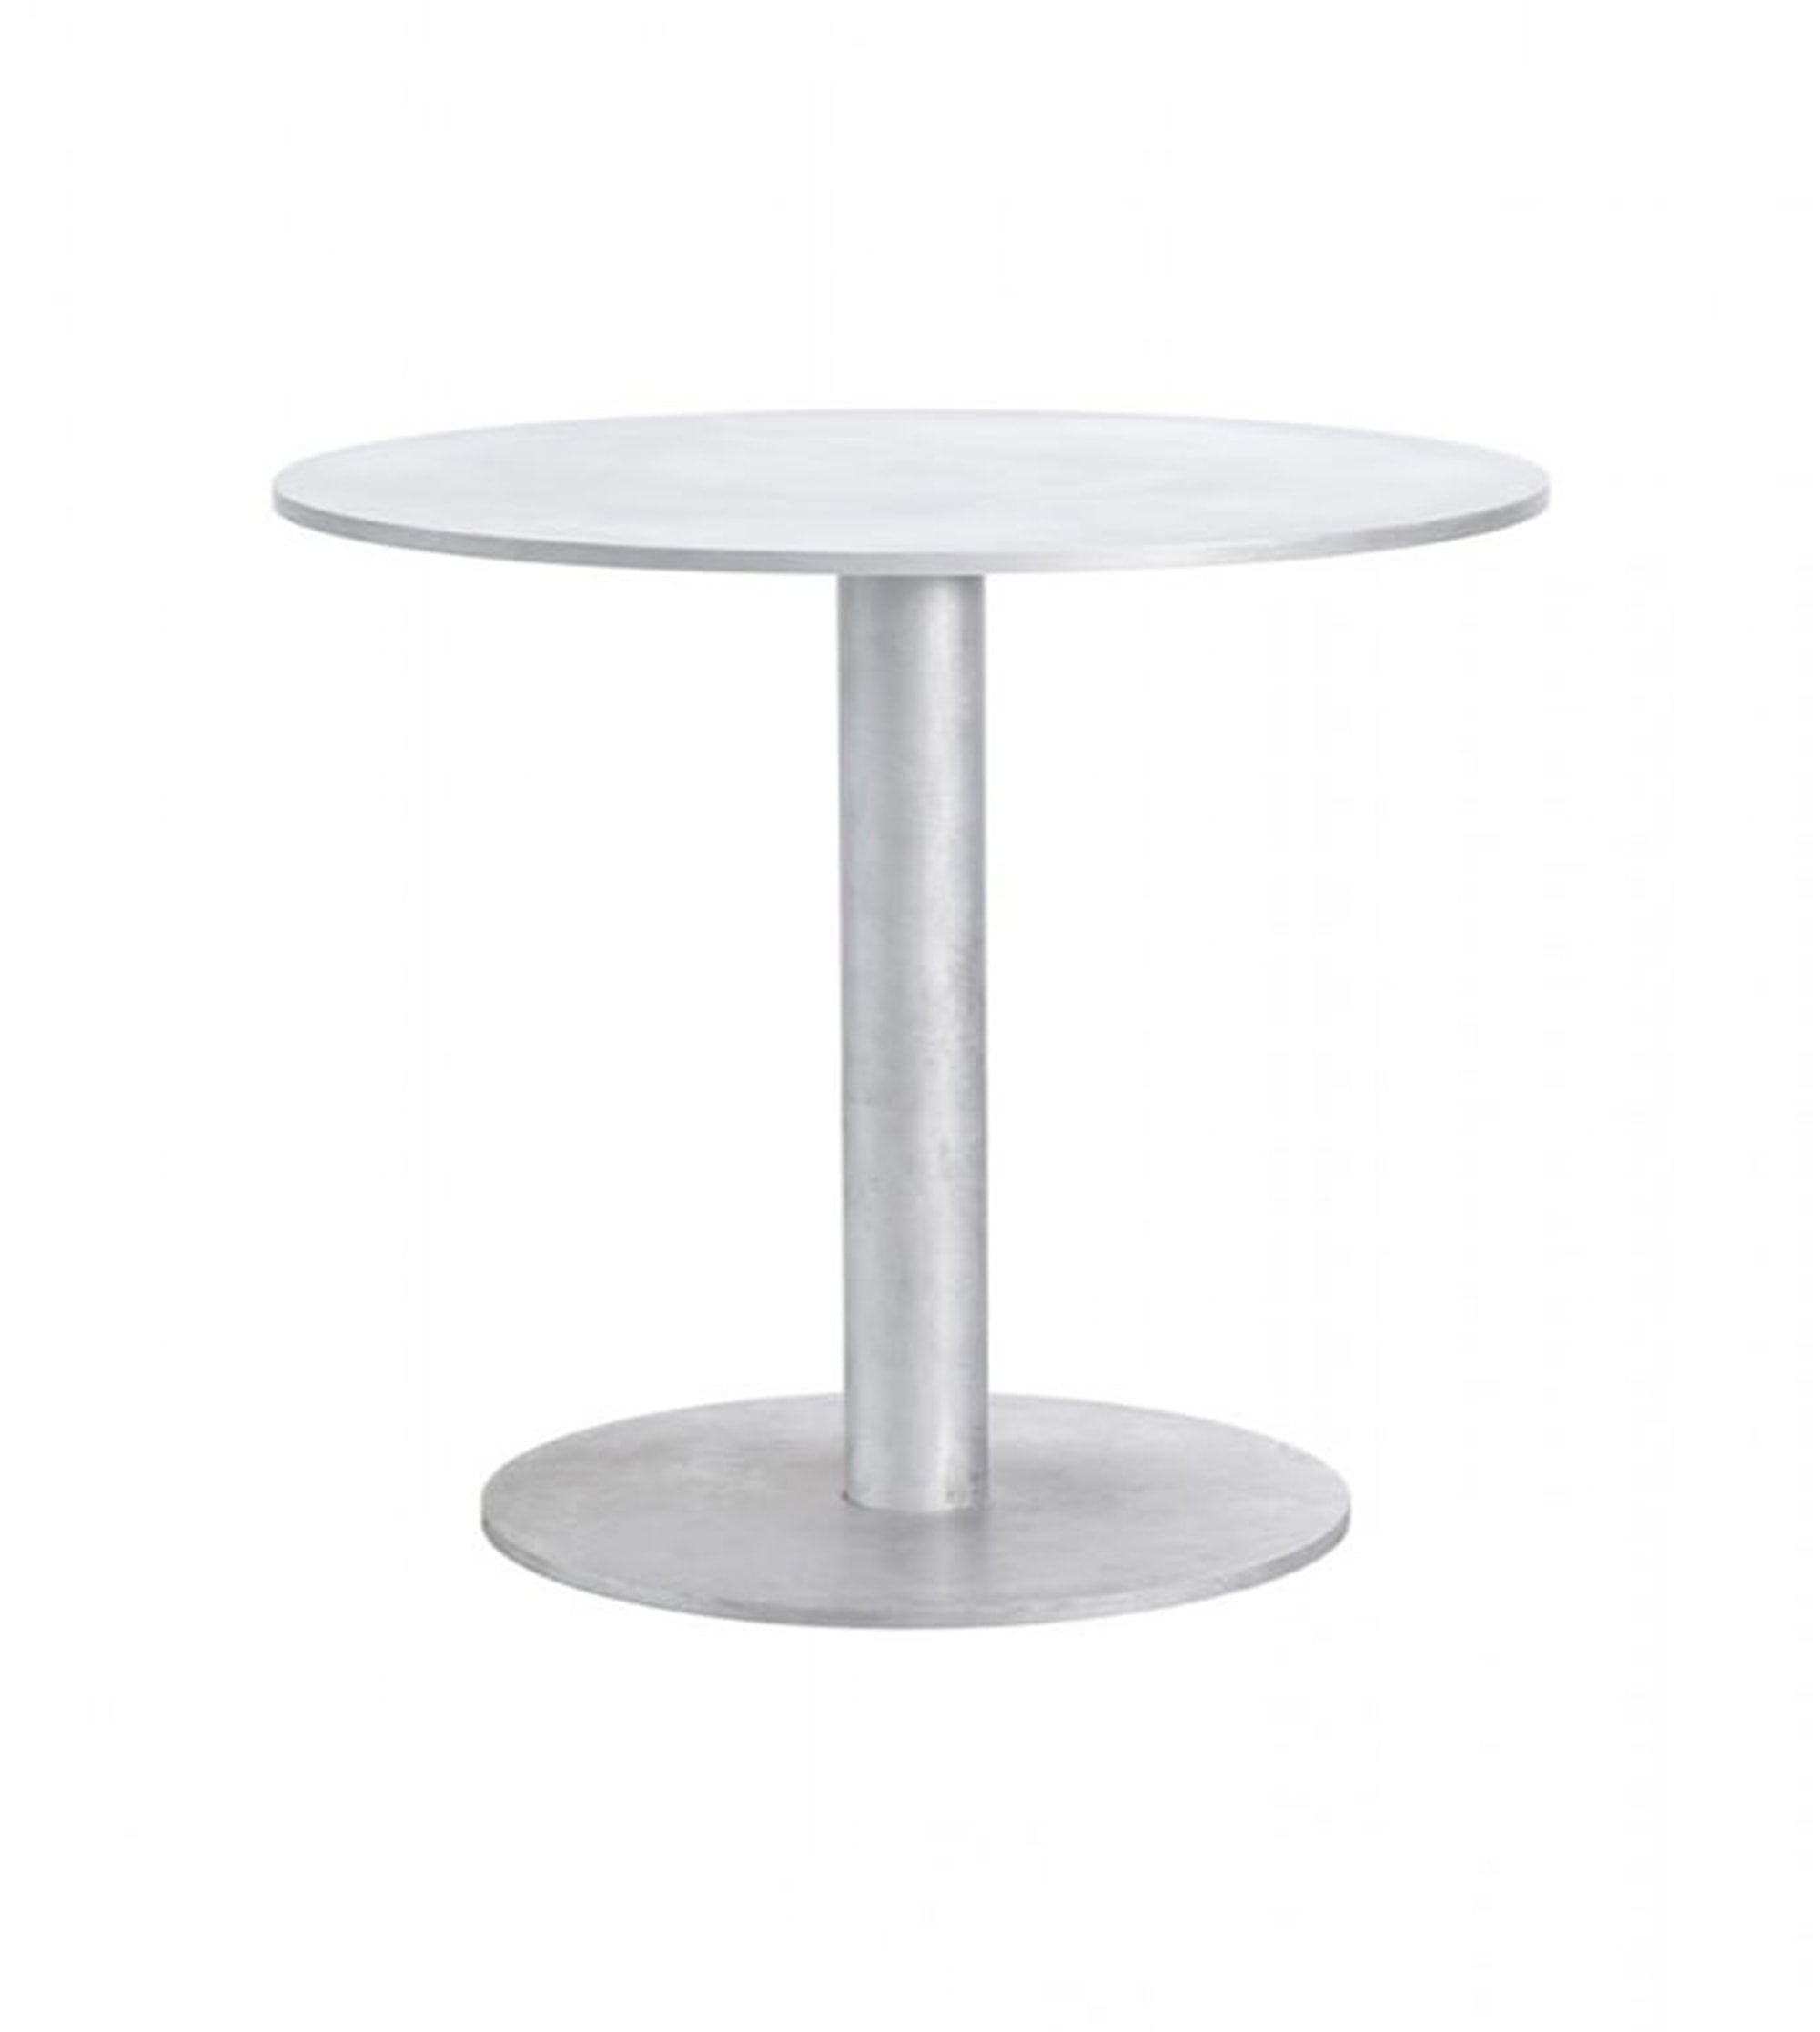 ROUND TABLE S - VALERIE OBJECTS